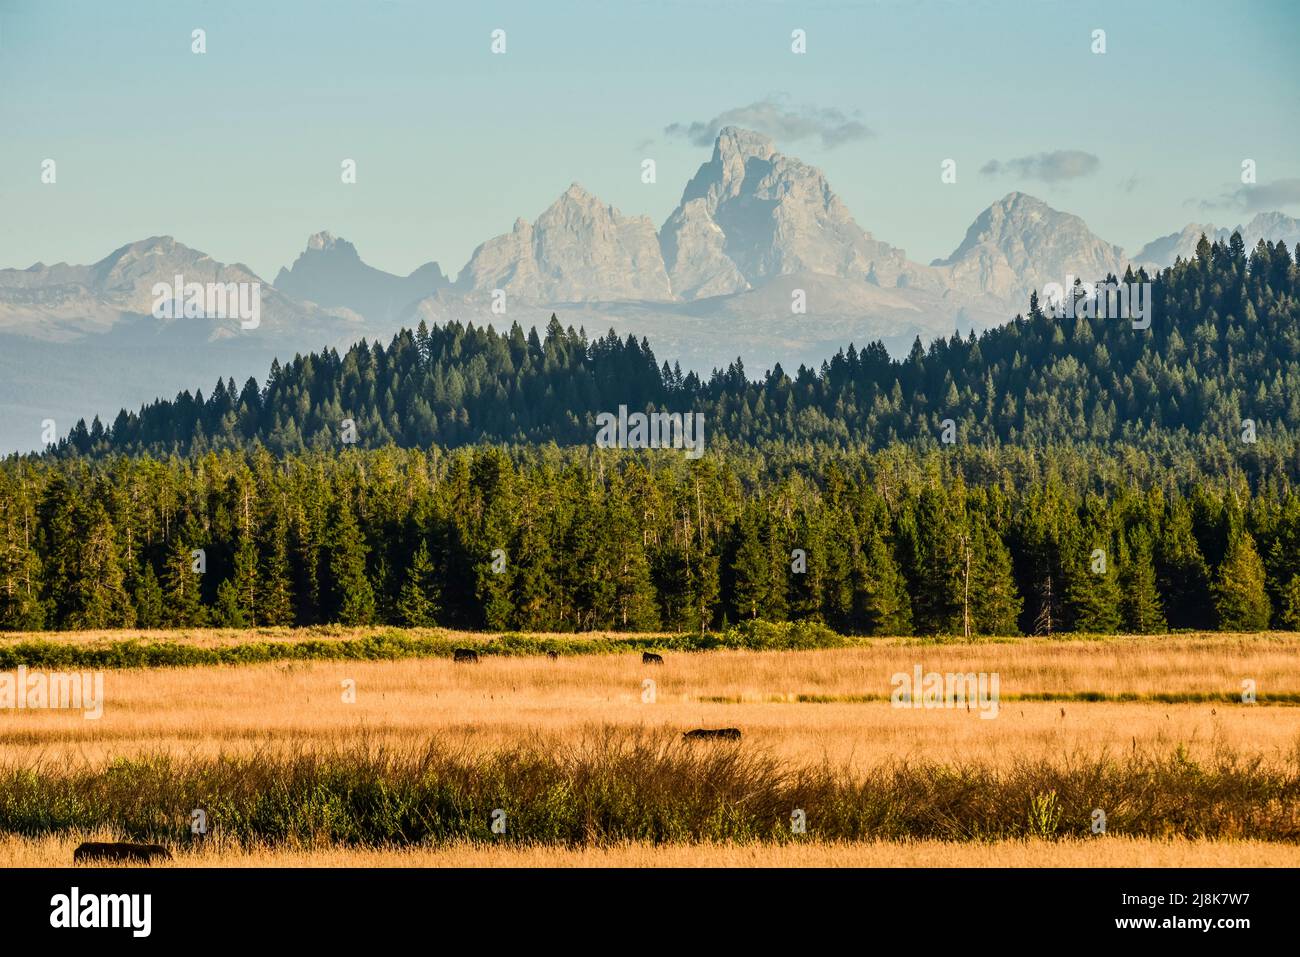 Livestock graze in a pasture along Warm River with Teton Range in the background in Island Park, Fremont County, Idaho, USA Stock Photo